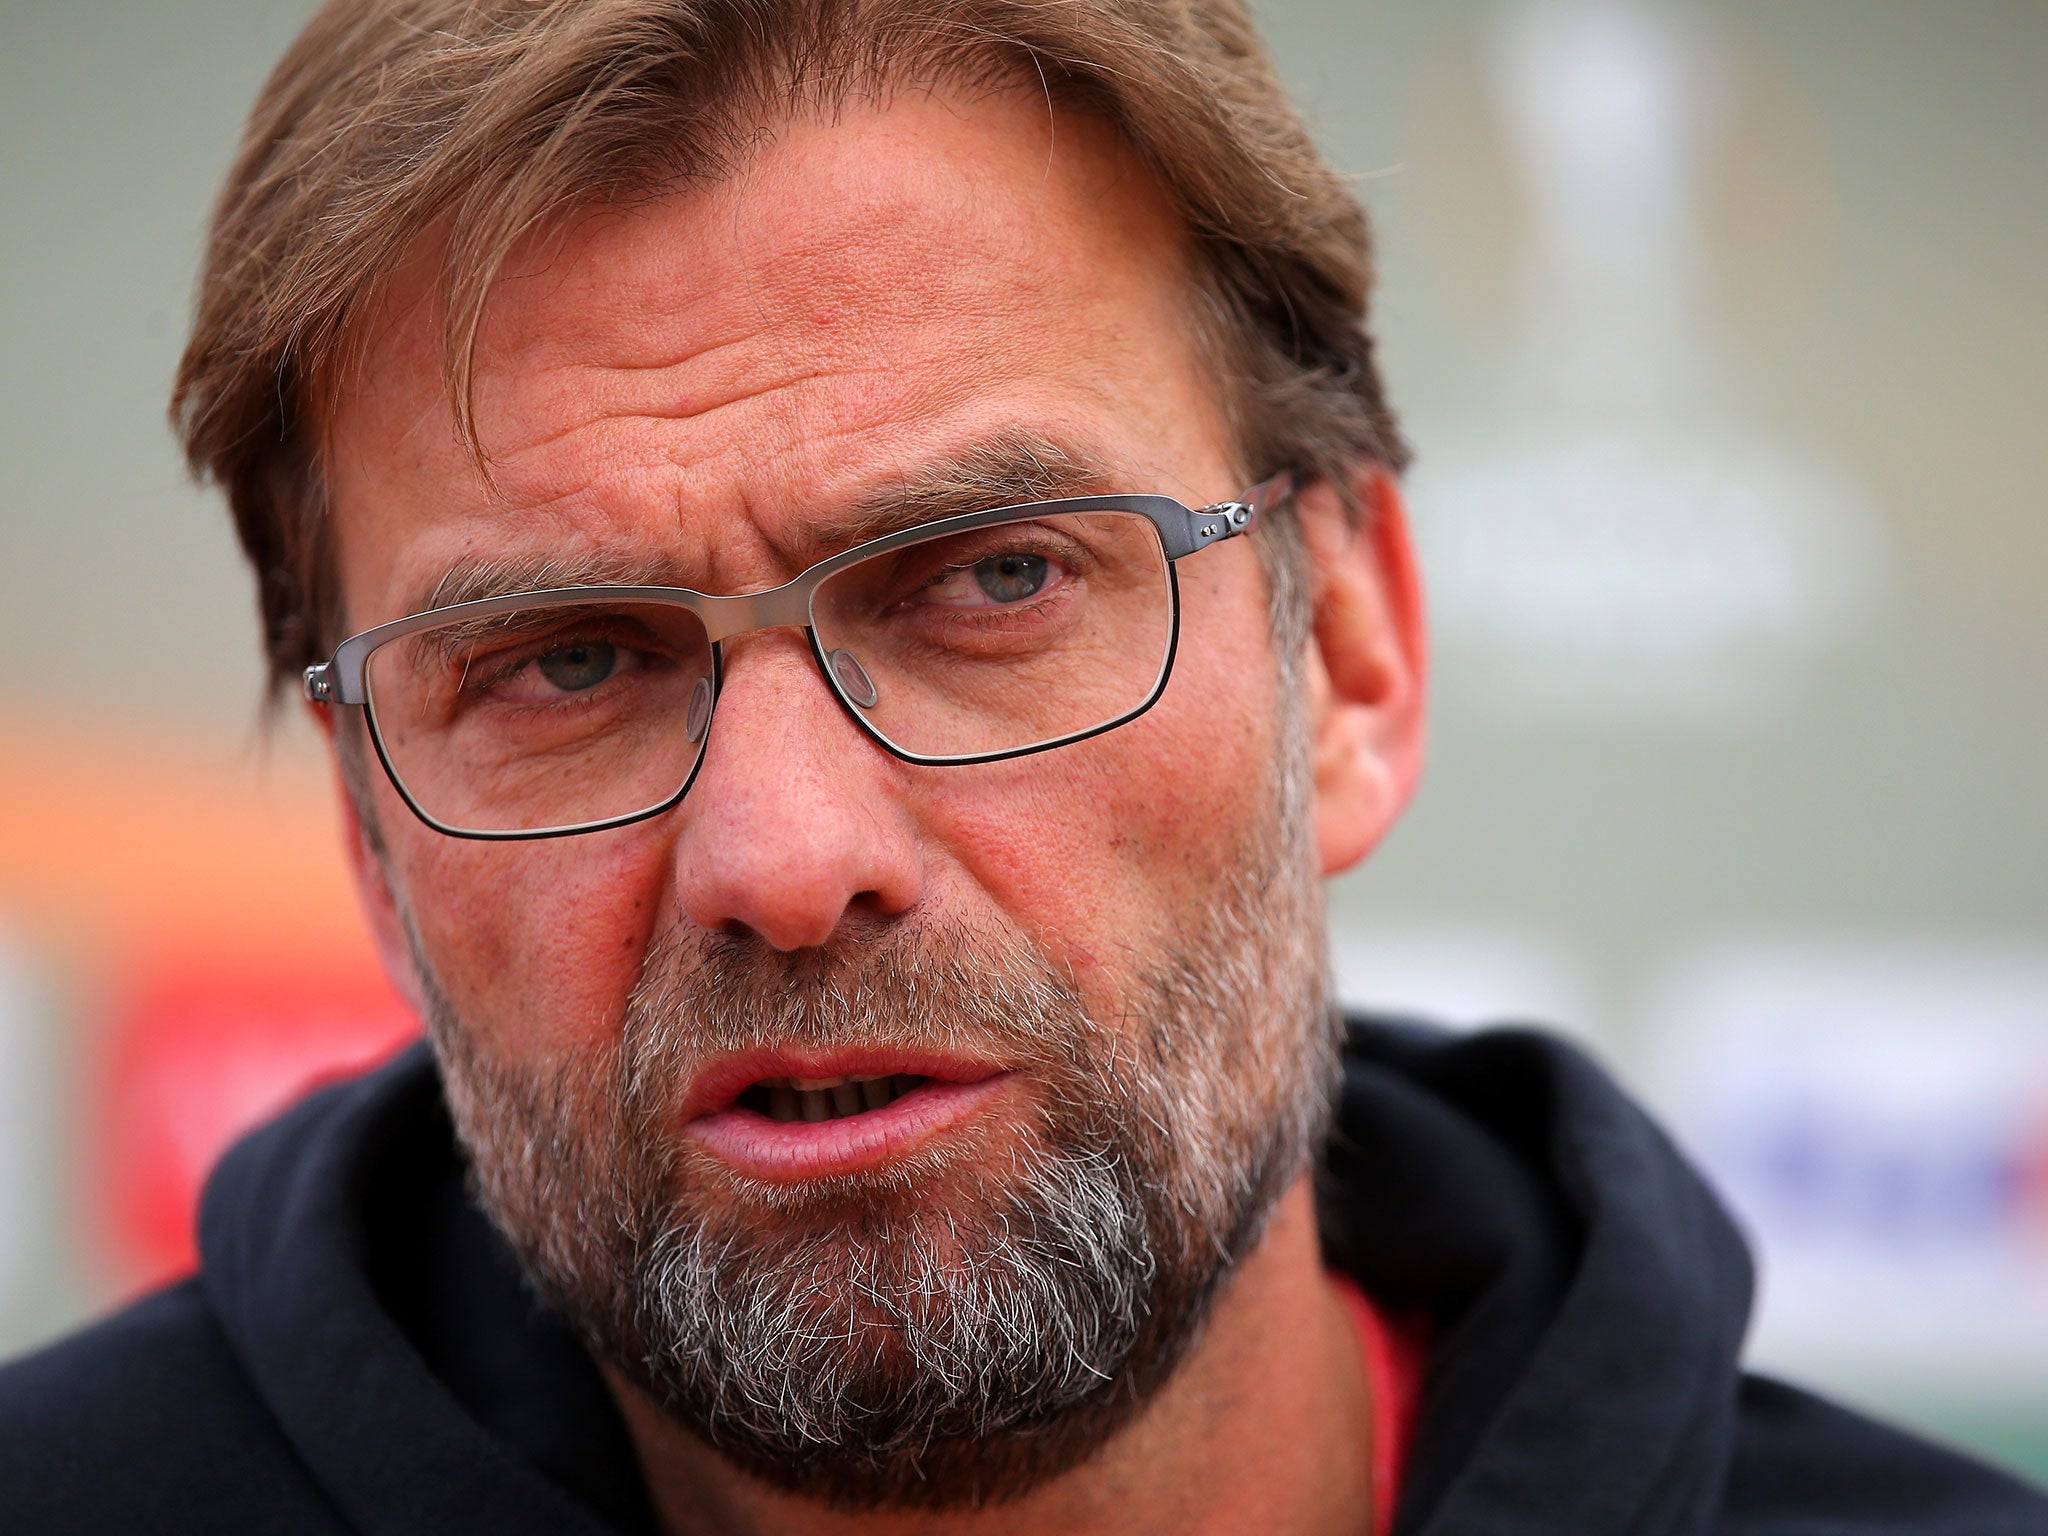 Klopp said it was 'difficult' to understand what had happened